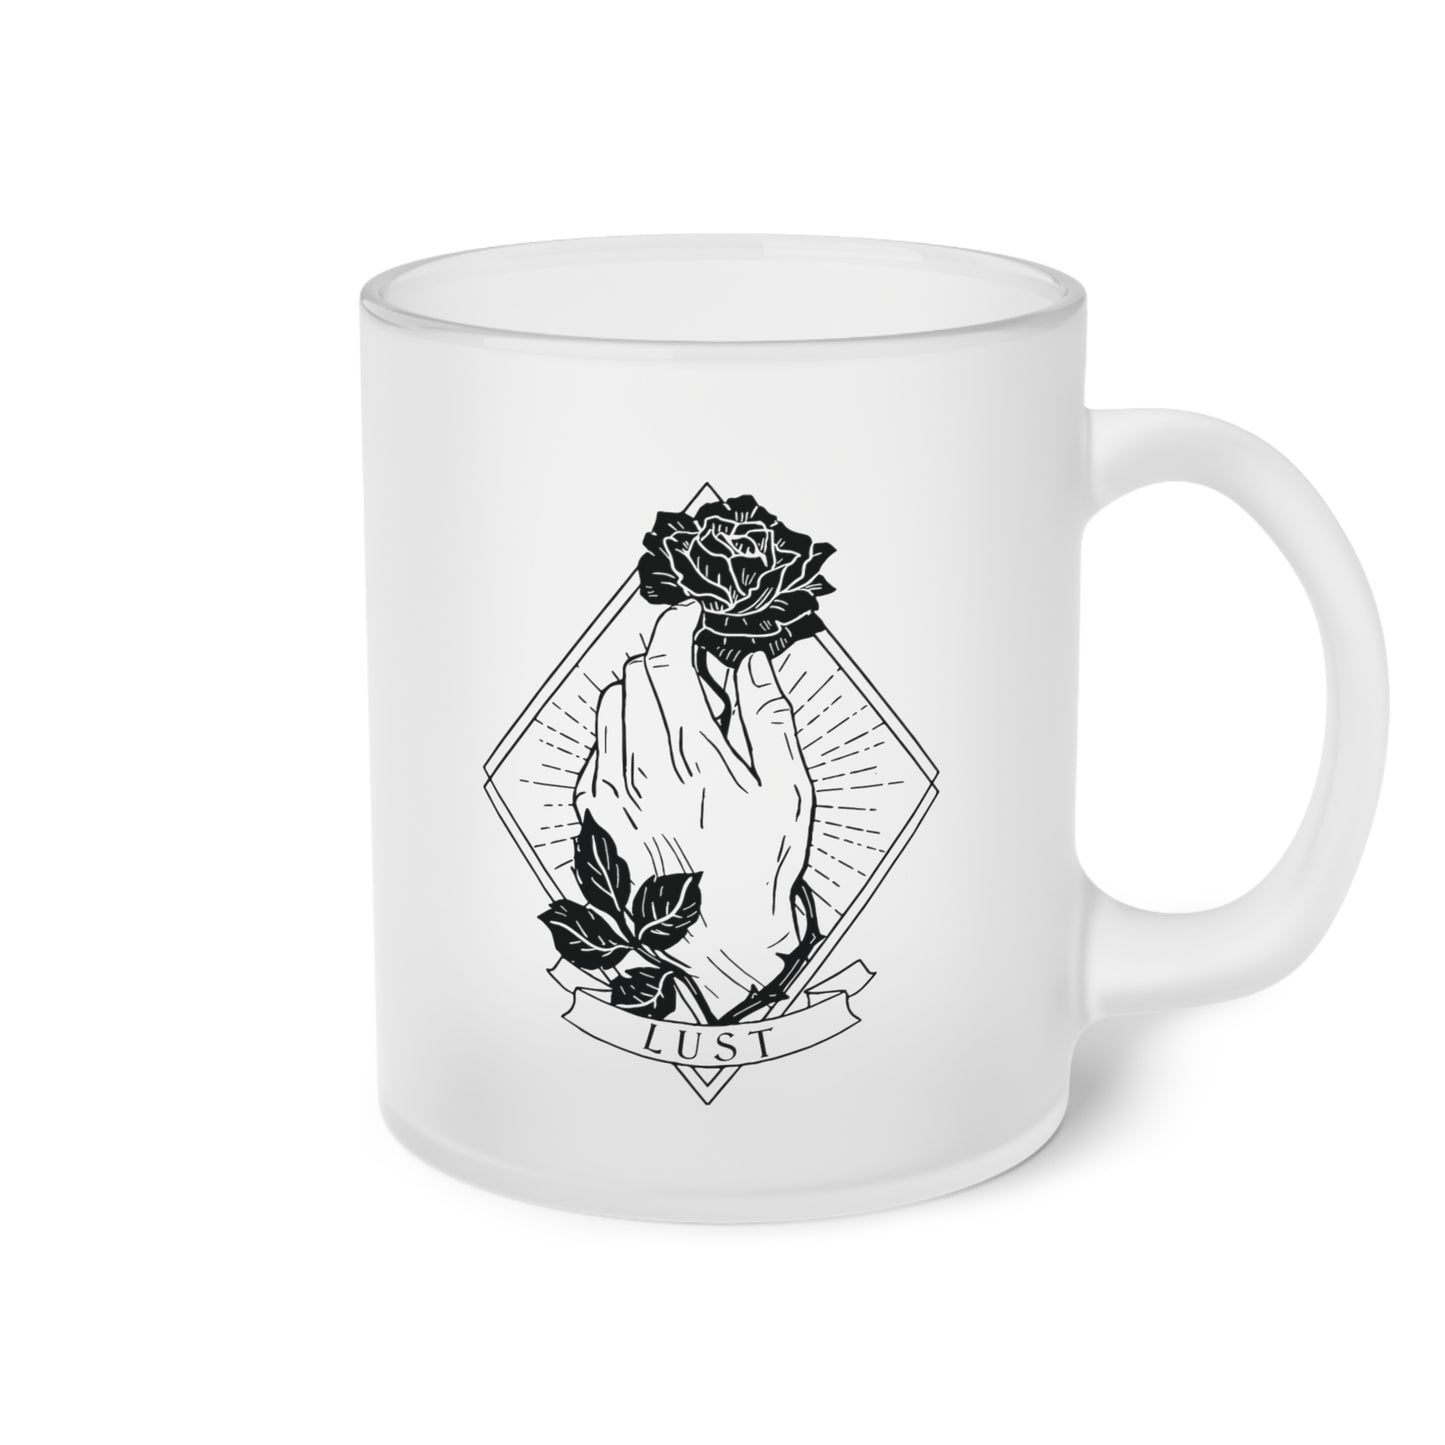 Lust Frosted Glass Mug